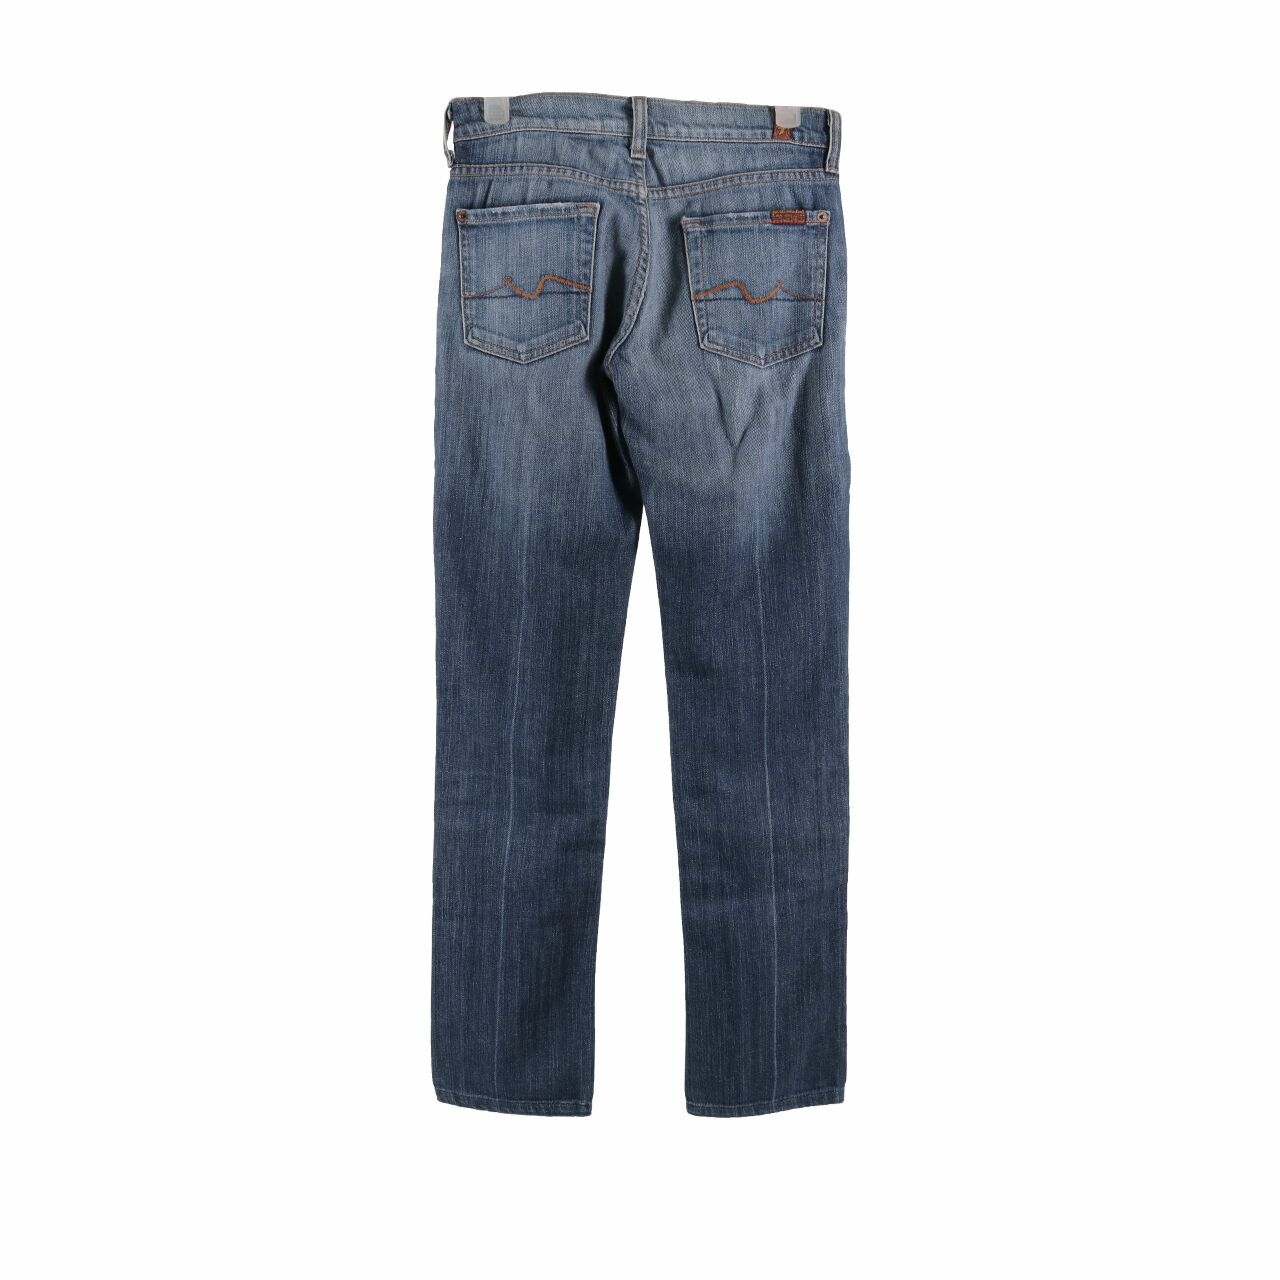 7 For All Mankind Jeans Long Pants